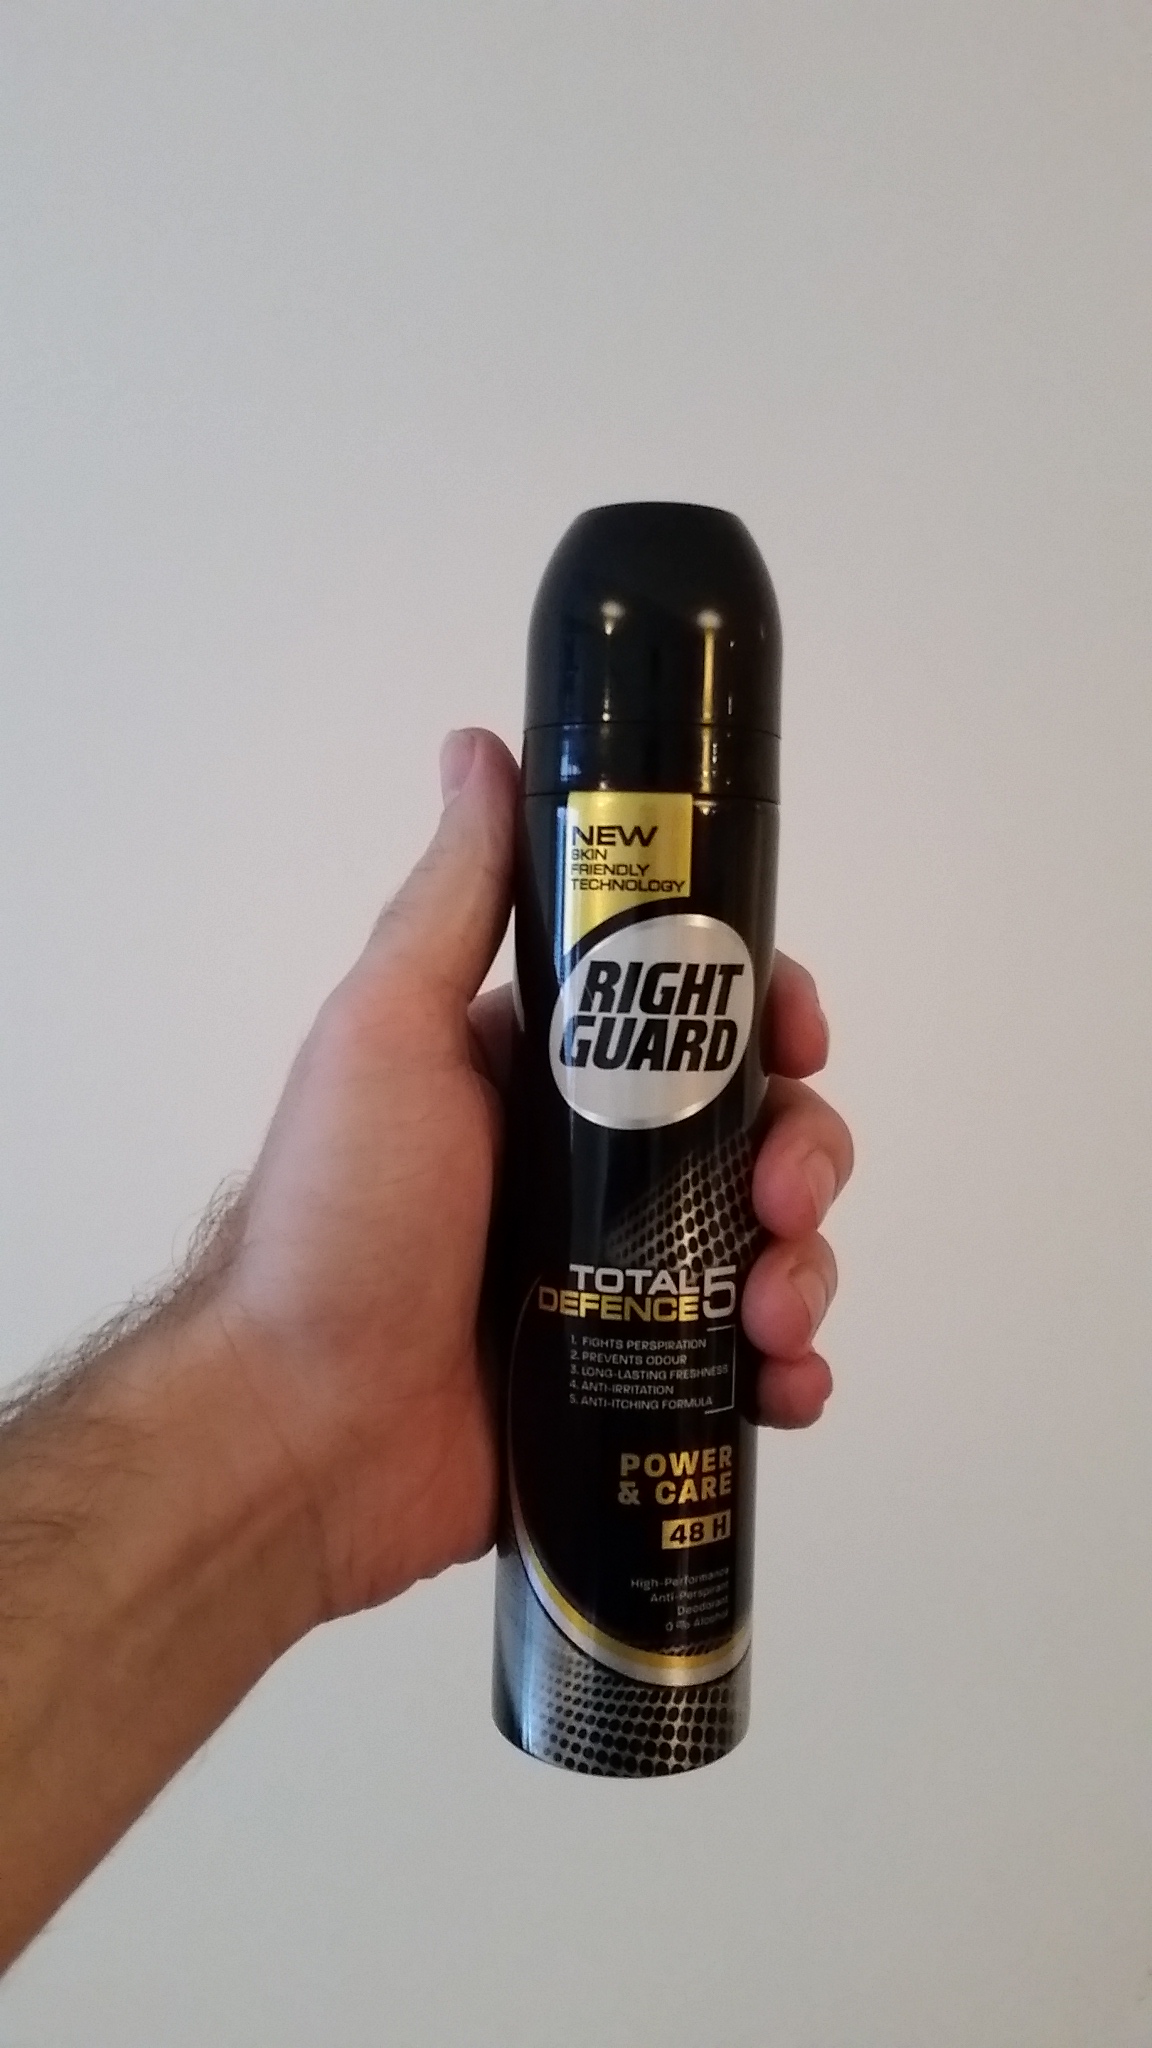 Right Guard Total Defence 5 Power & Care Deodorant